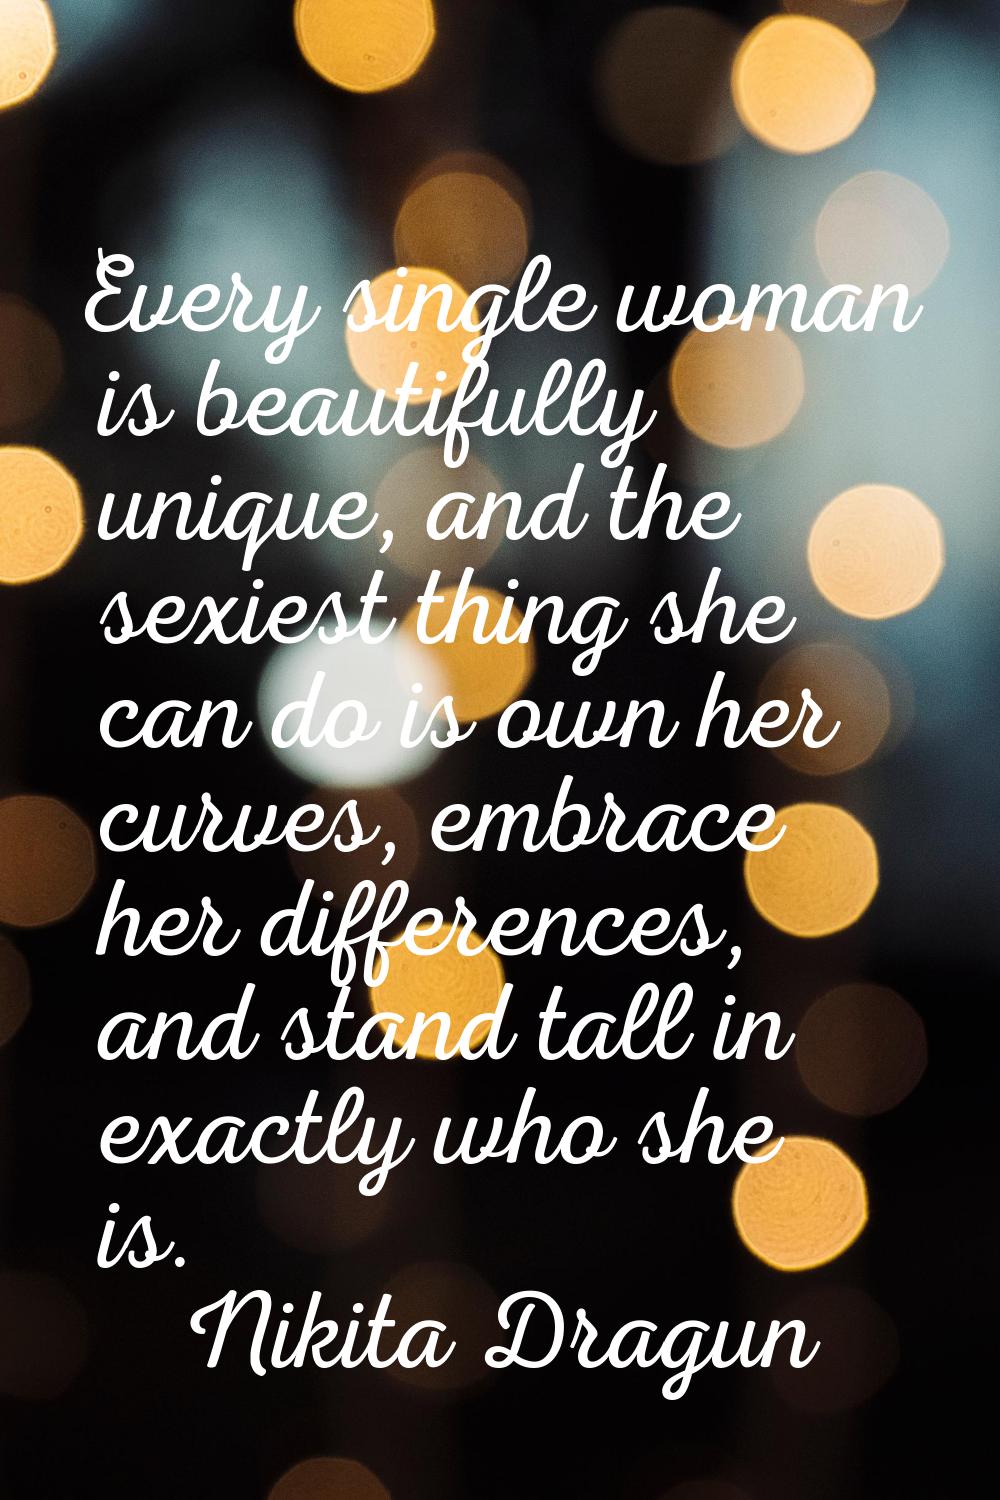 Every single woman is beautifully unique, and the sexiest thing she can do is own her curves, embra